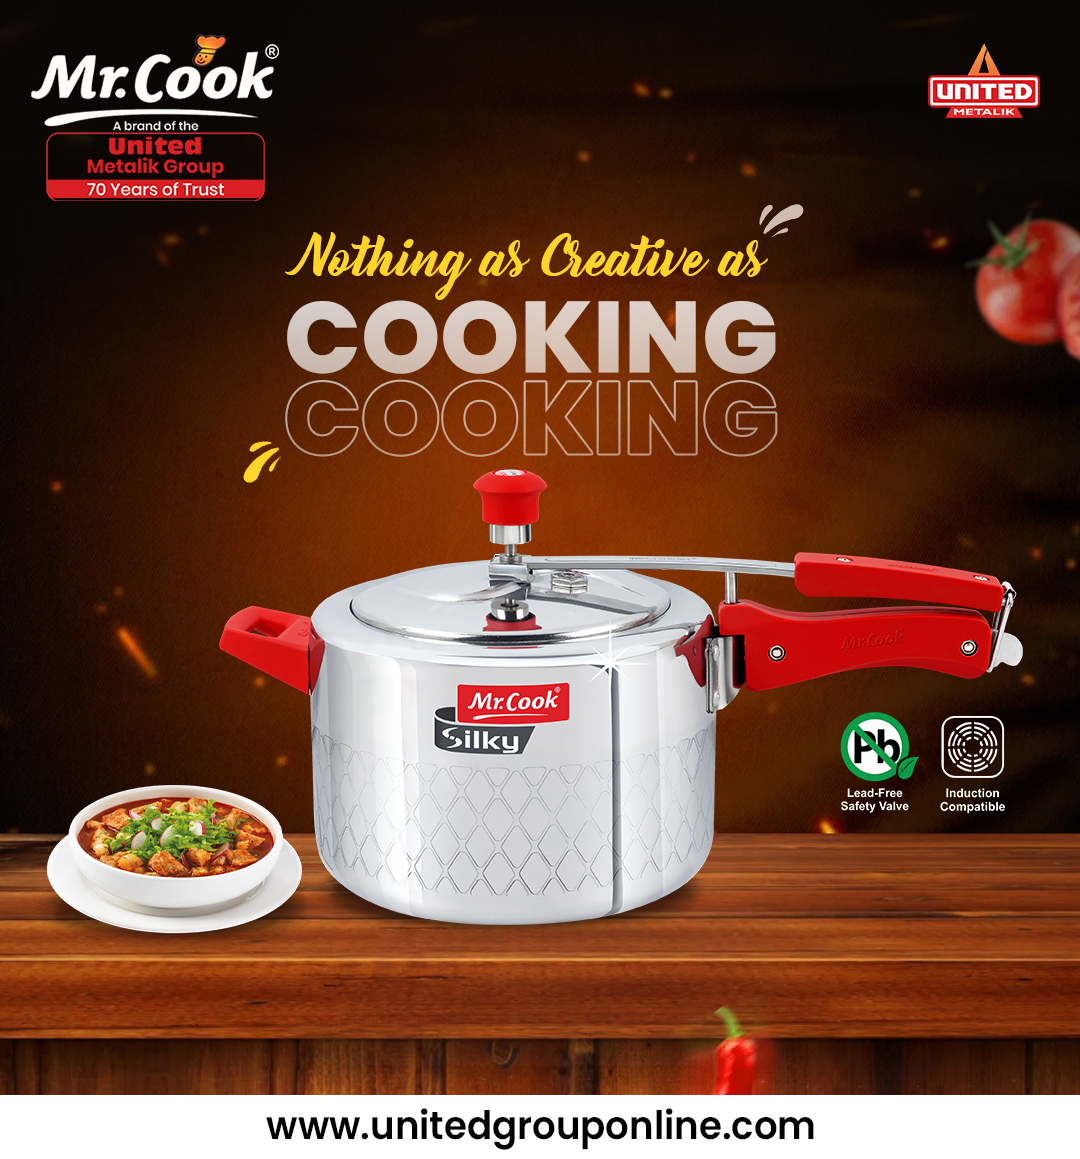 Nothing as creative as cooking...😋😋
.
.
.
#mrcook #Unitedgroup #Cookers #Cookware #PressureCookers #HealthyCooking #Deep #roundedkadai
#RoundedTawa #Wok #Stwe #Pot #StainlessSteel
#Durable #Reliable #PremiumQuality #Tastyfood #Chefchoice
#Qualityproduct #Customersatisfaction